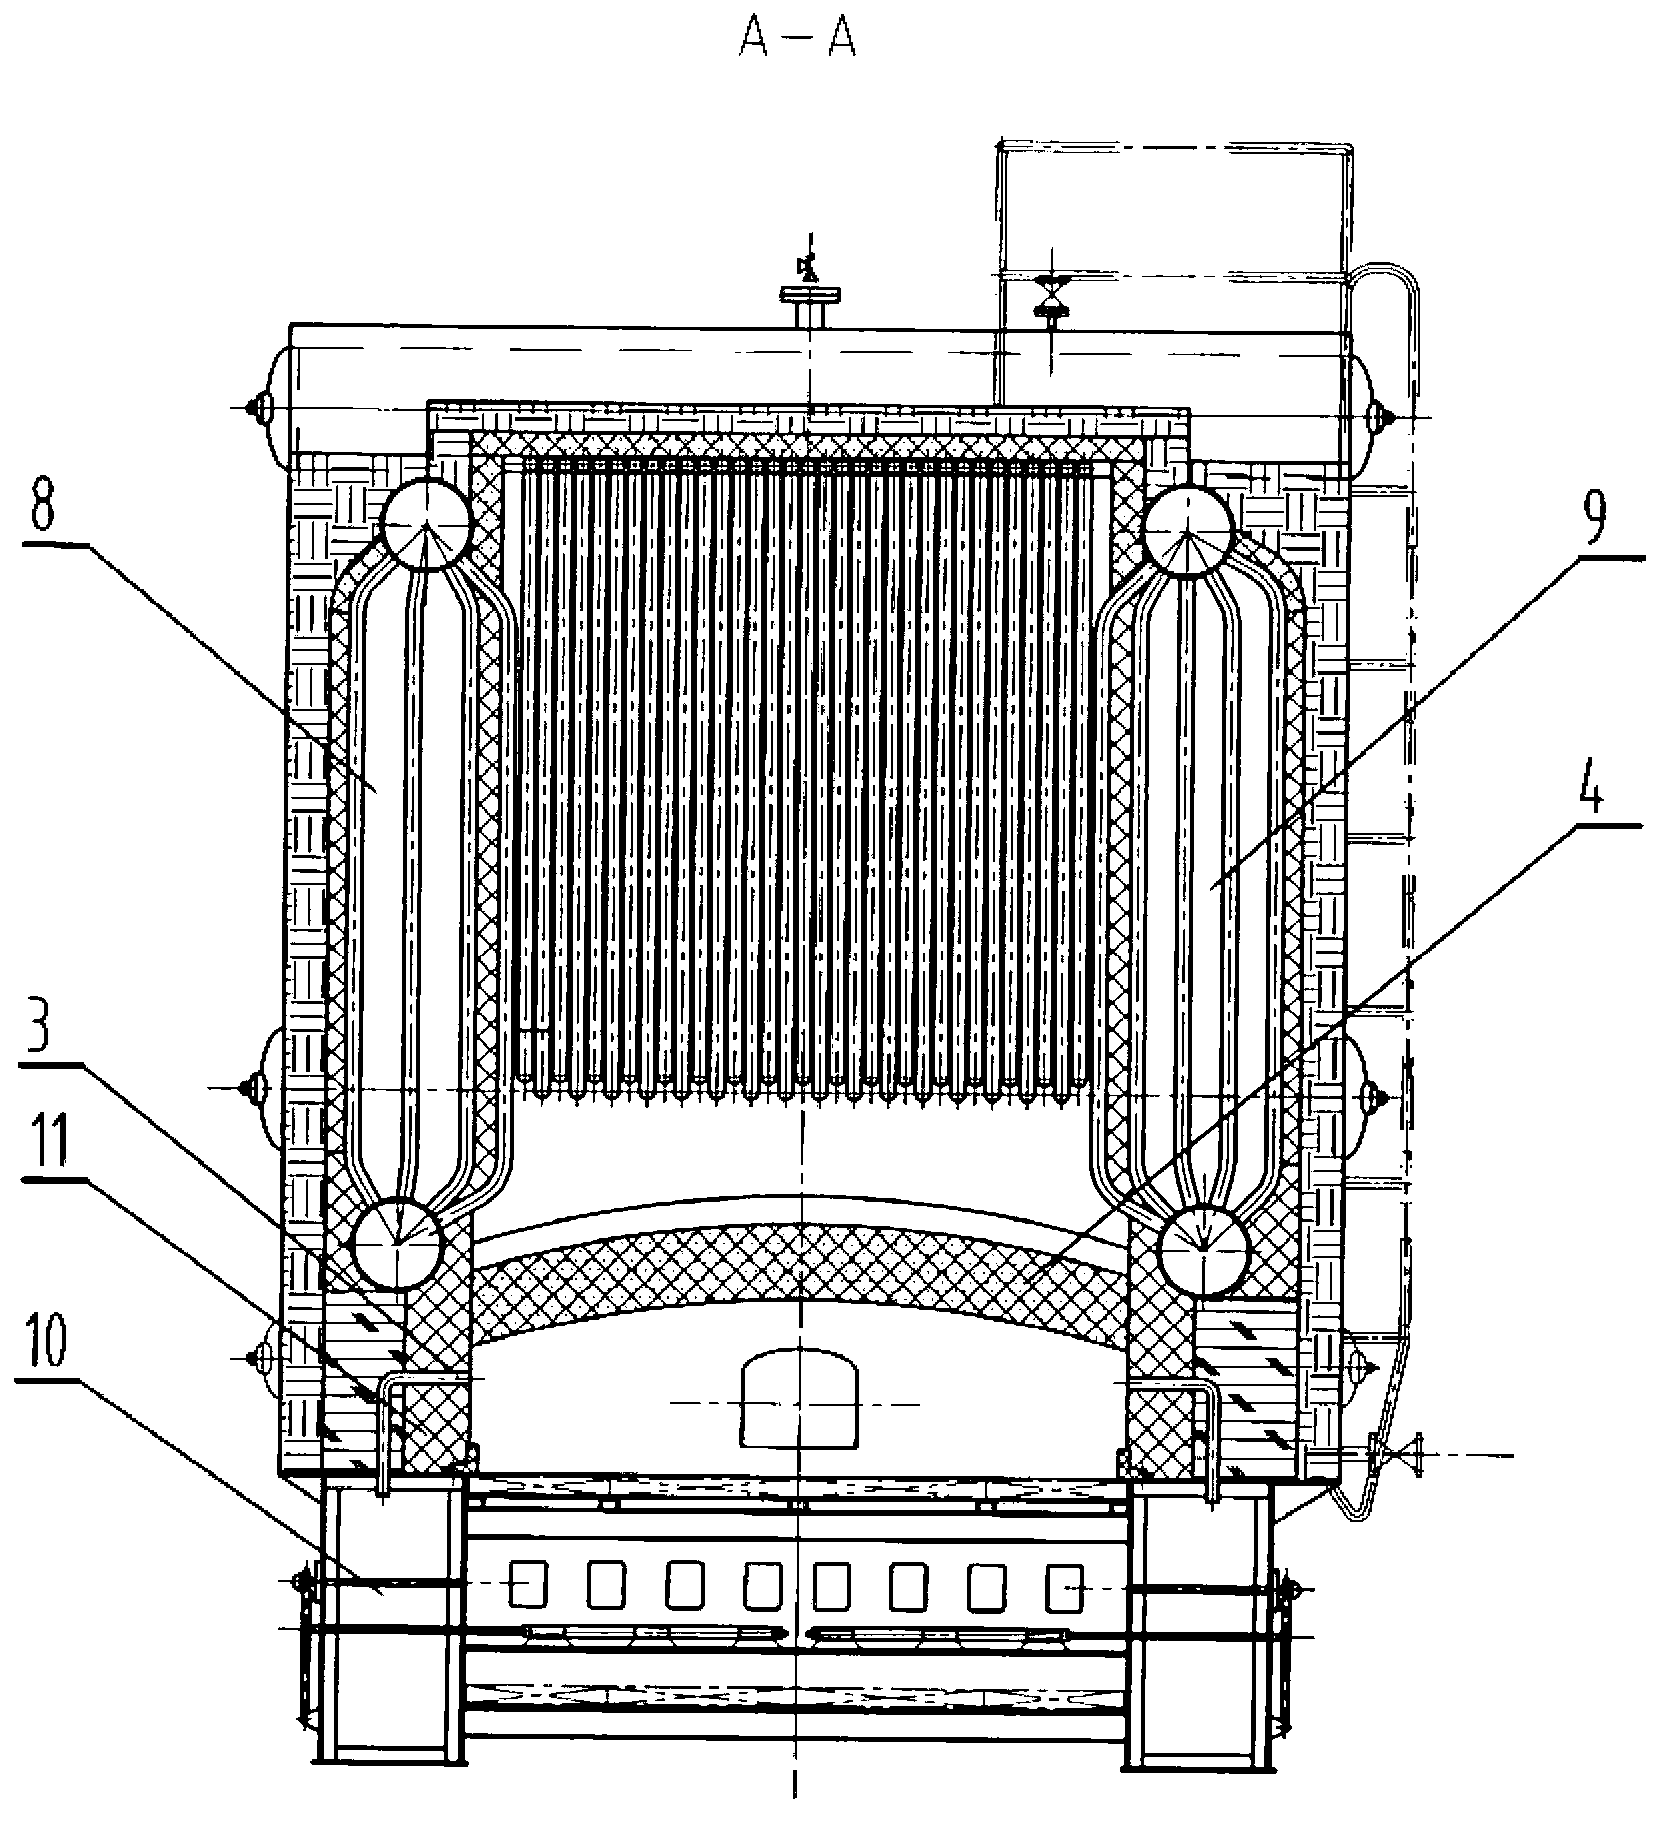 Chain grate boiler with full-coverage front arch